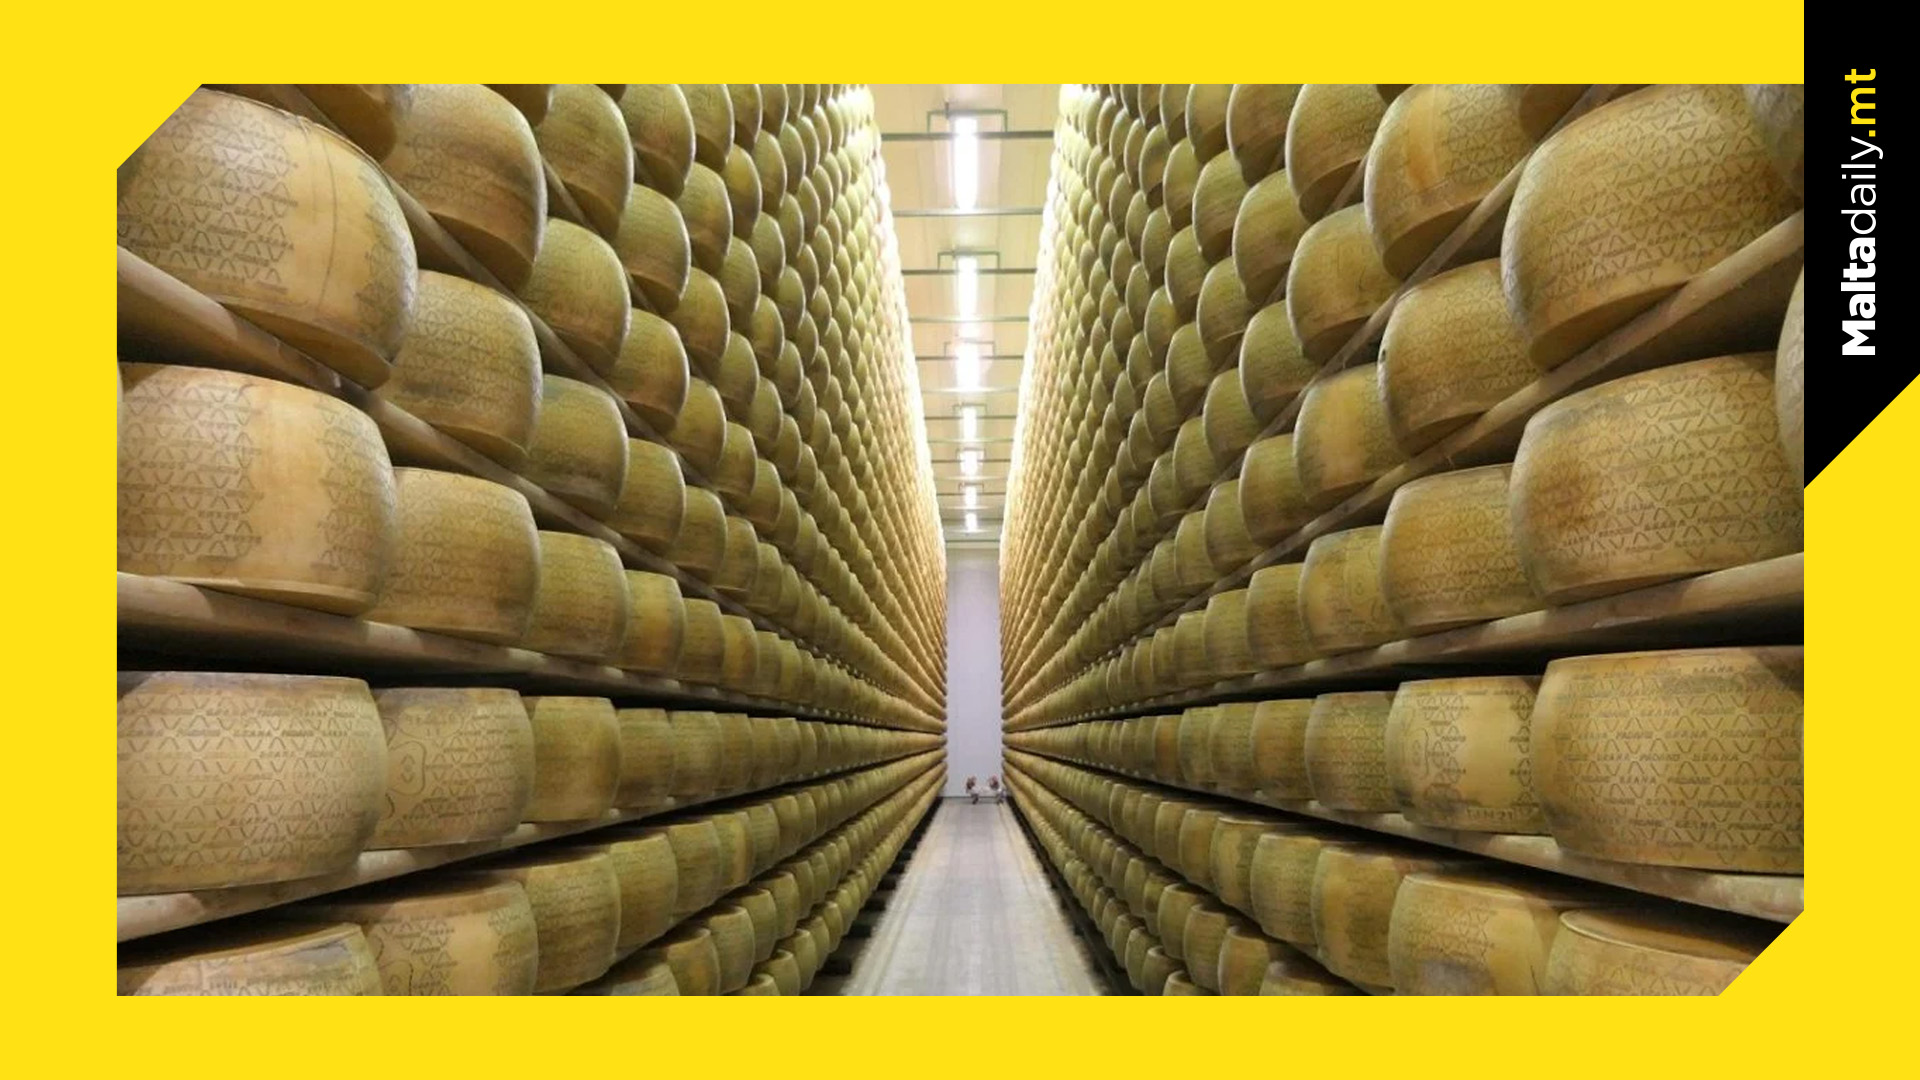 Man Crushed to Death by Cheese Wheels in Tragic Factory Incident